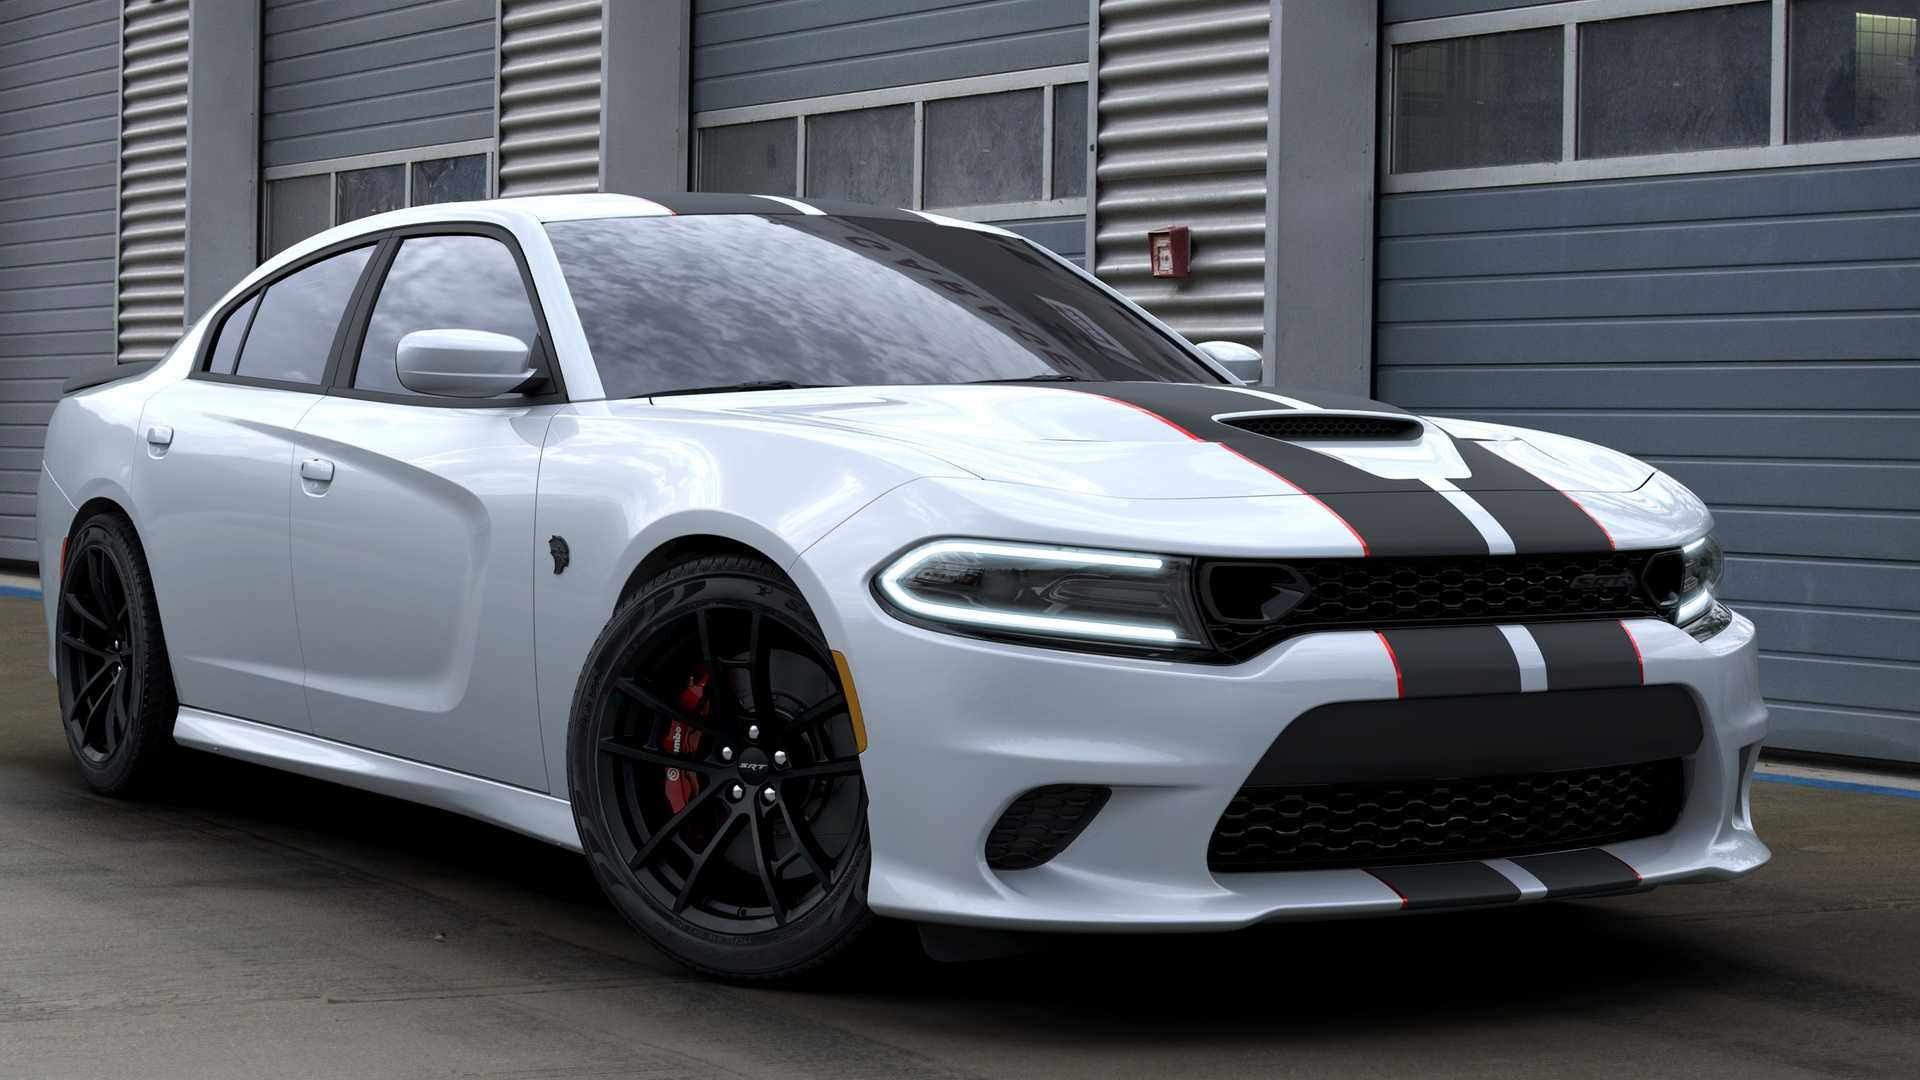 2019 Dodge Charger SRT Hellcat Octane Edition (Color: White Knuckle) Front Three-Quarter Wallpapers (2)